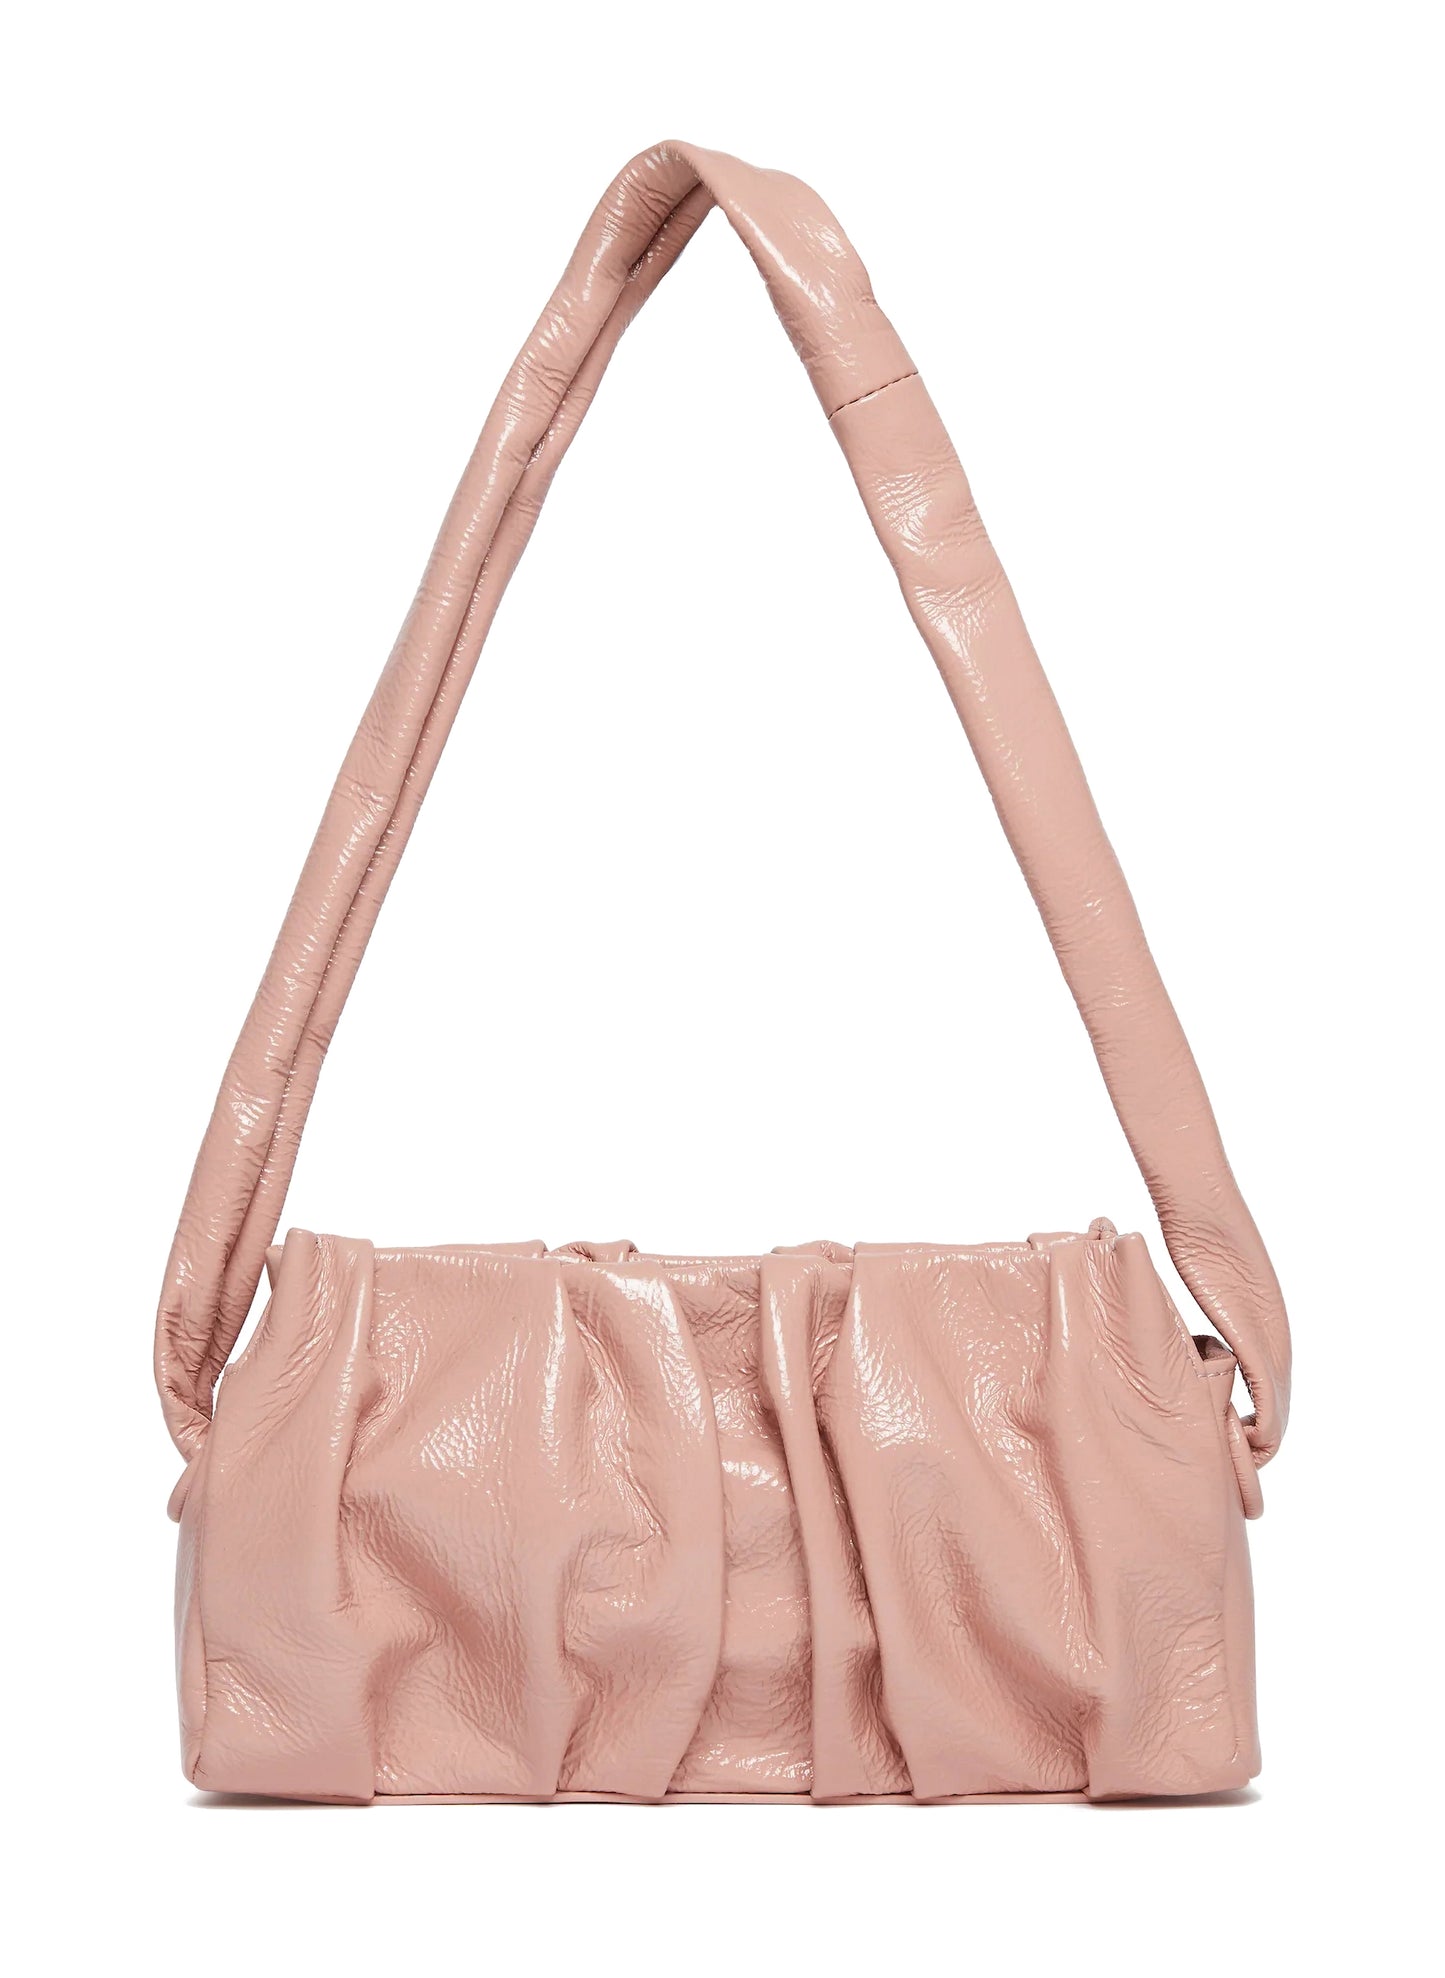 Vague Patent Leather Pink